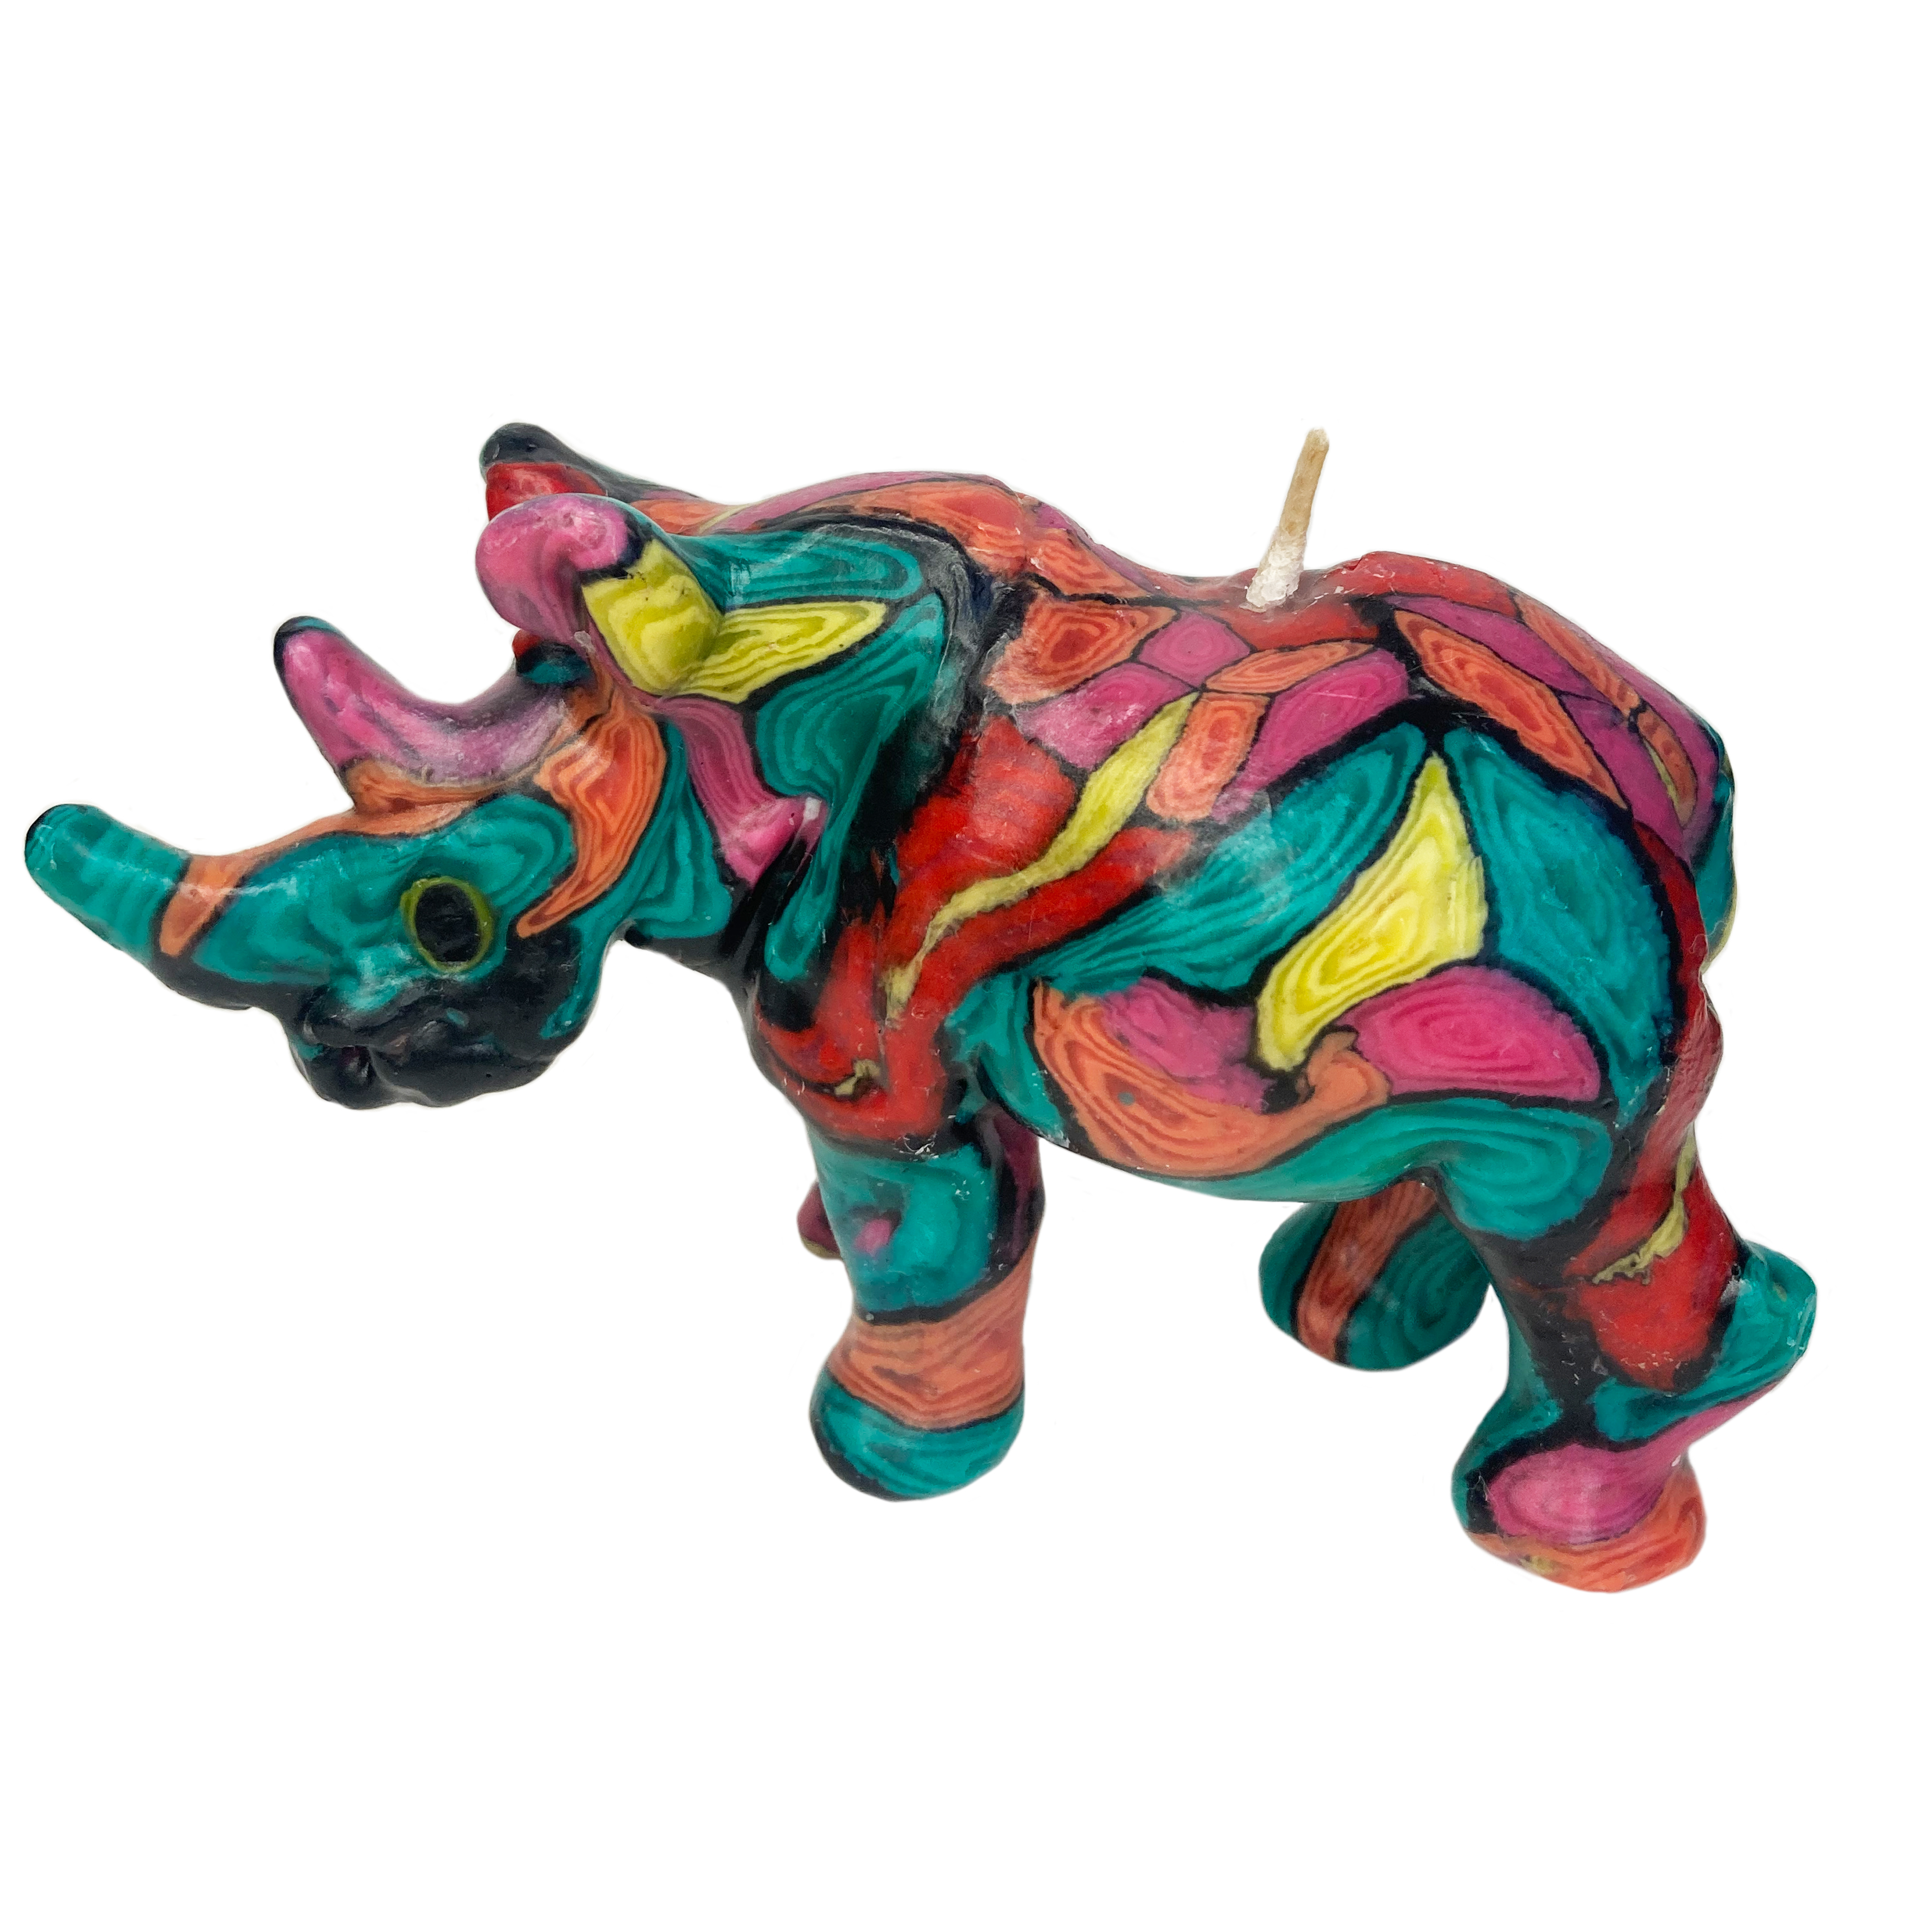 Swazi Candles Small Fairtrade Rhino Swazi Candle In Colourful Pattern